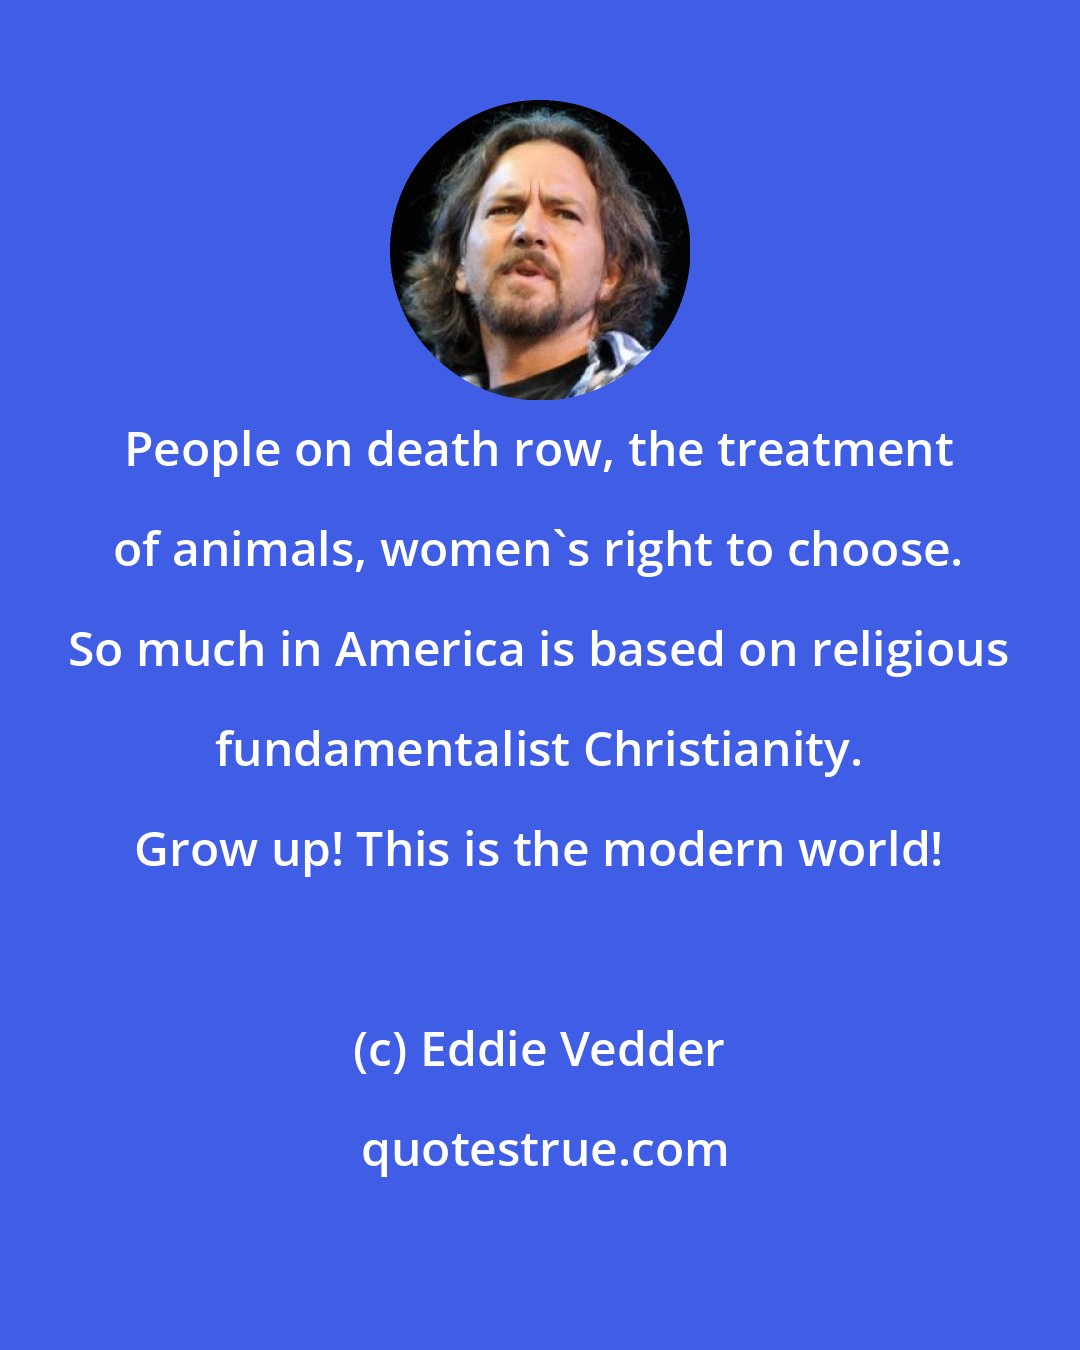 Eddie Vedder: People on death row, the treatment of animals, women's right to choose. So much in America is based on religious fundamentalist Christianity. Grow up! This is the modern world!